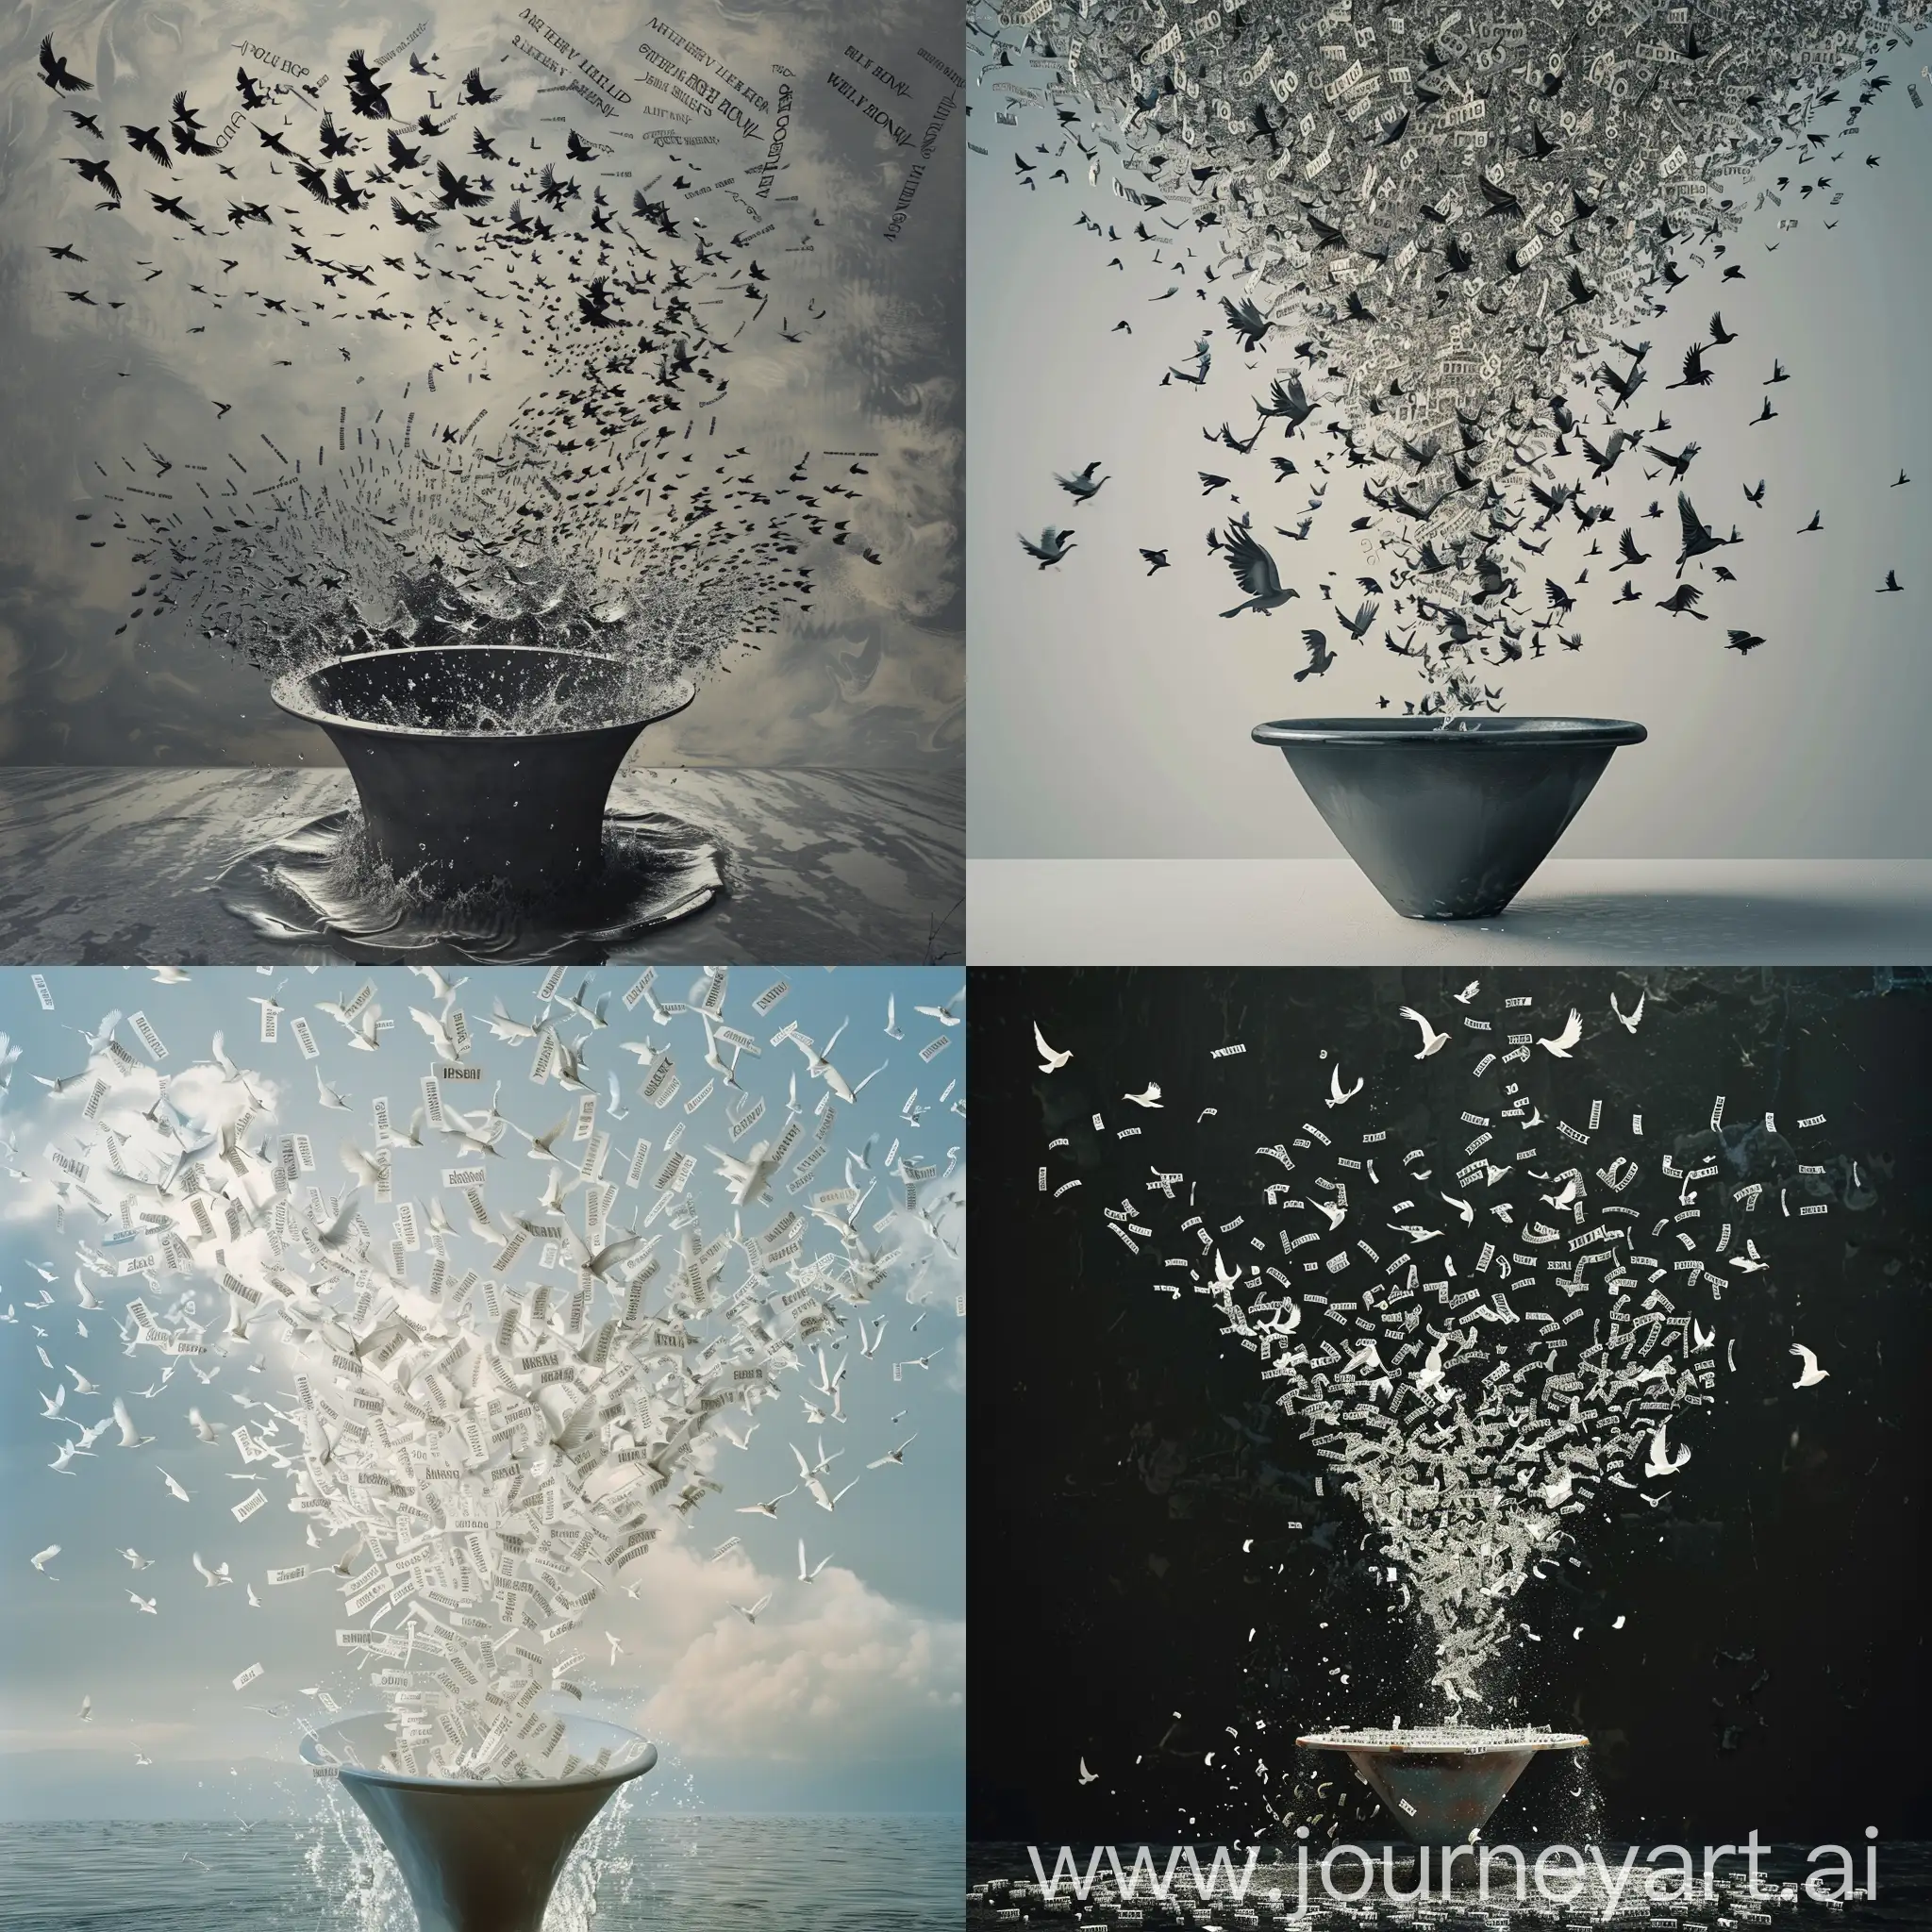 Conceptual art: A "flock" of written words swirl above and fall into a funnel